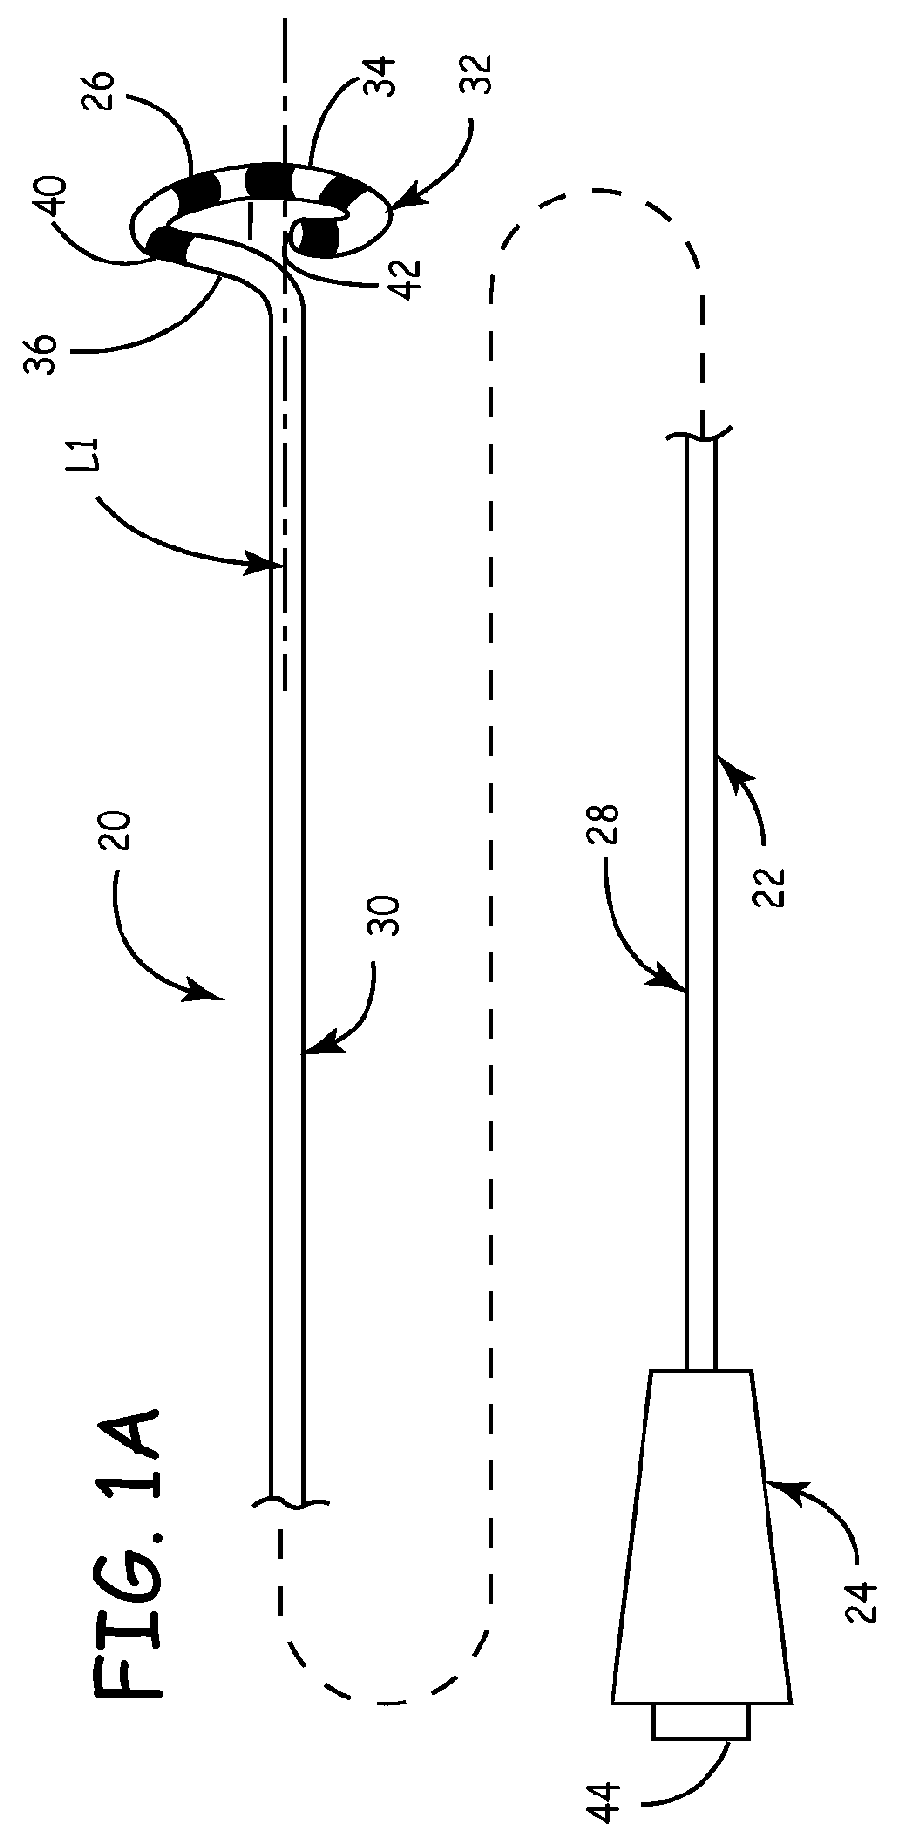 Ablation catheter assembly with radially decreasing helix and method of use